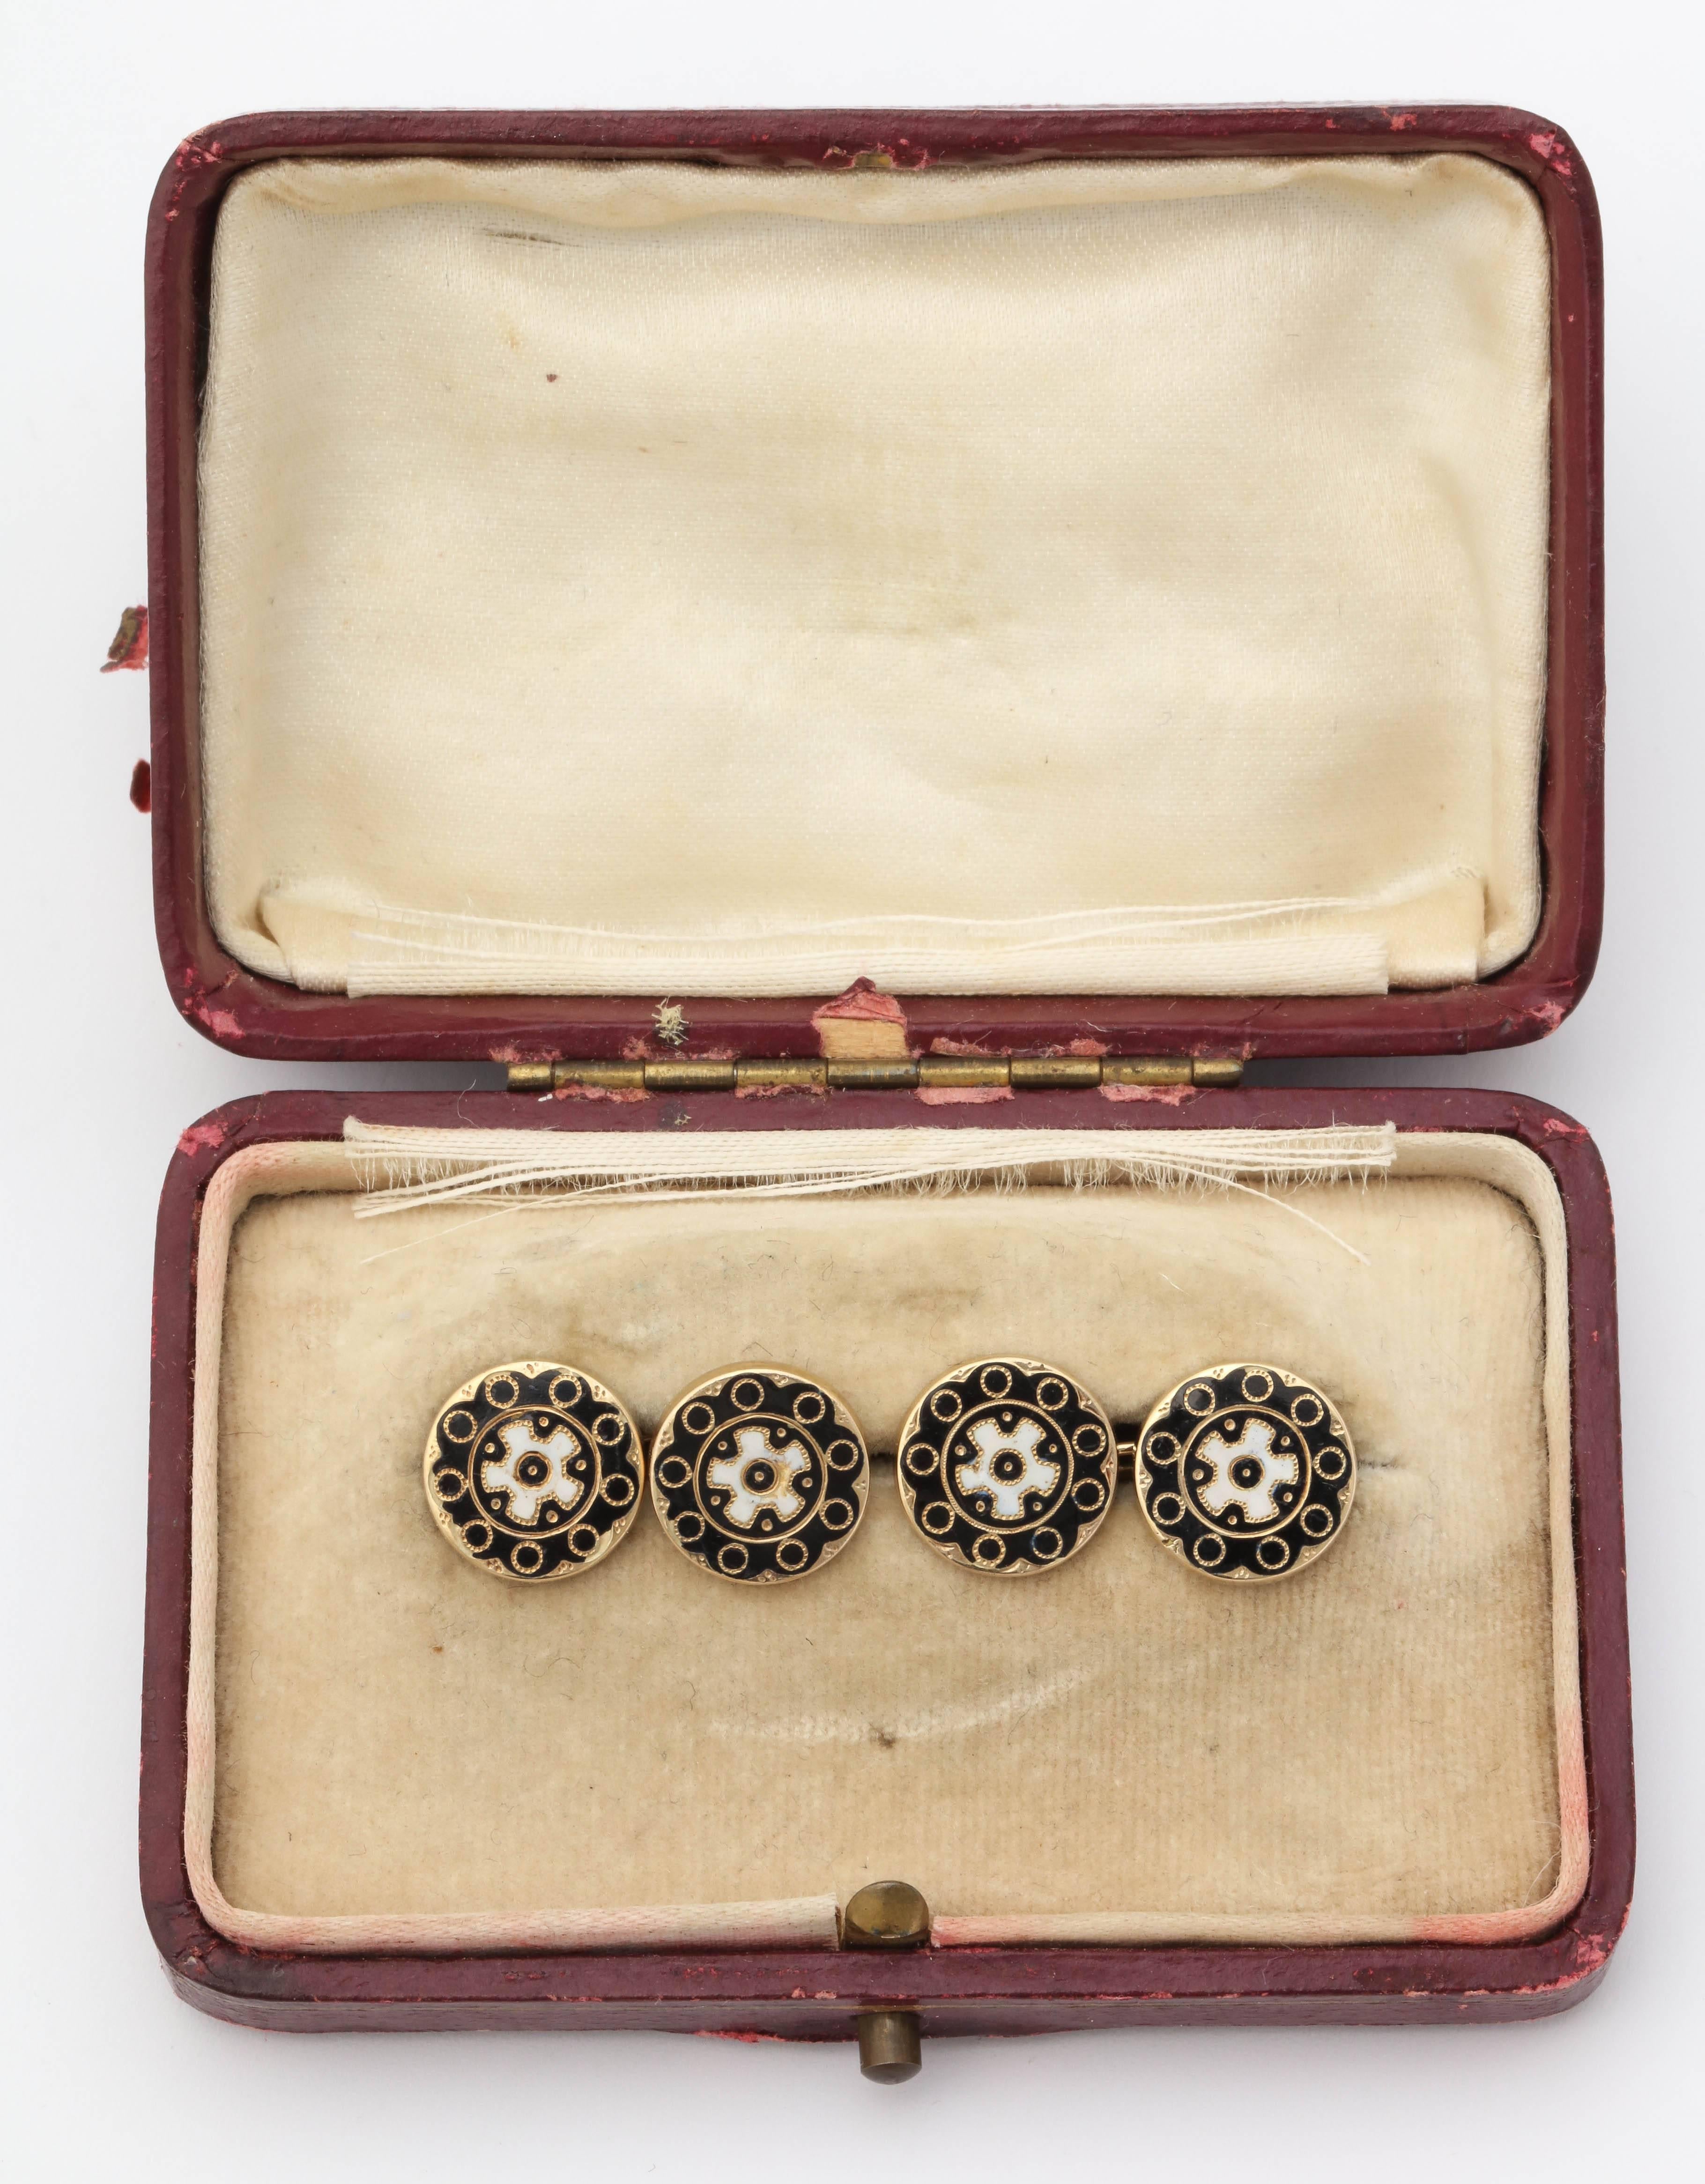 A pair of rare Russian enameled double sided 14k gold cufflinks from the Romanov era, period of Tsar Alexander II, each gold link enameled in black with white cogwheels, attached by oval link chains. 

Mid 19th century, hallmarked 56

Link-1/2 in.